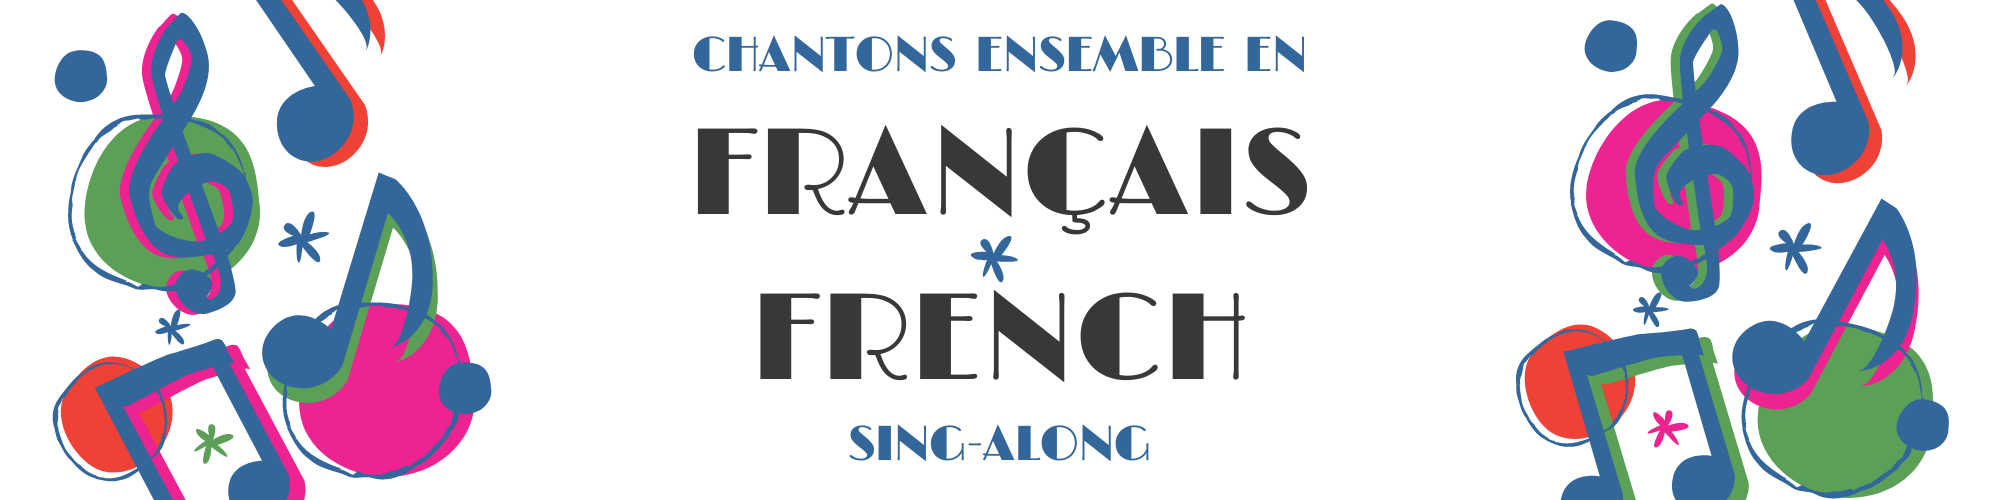 French Sing Along Poster 2000 500 px